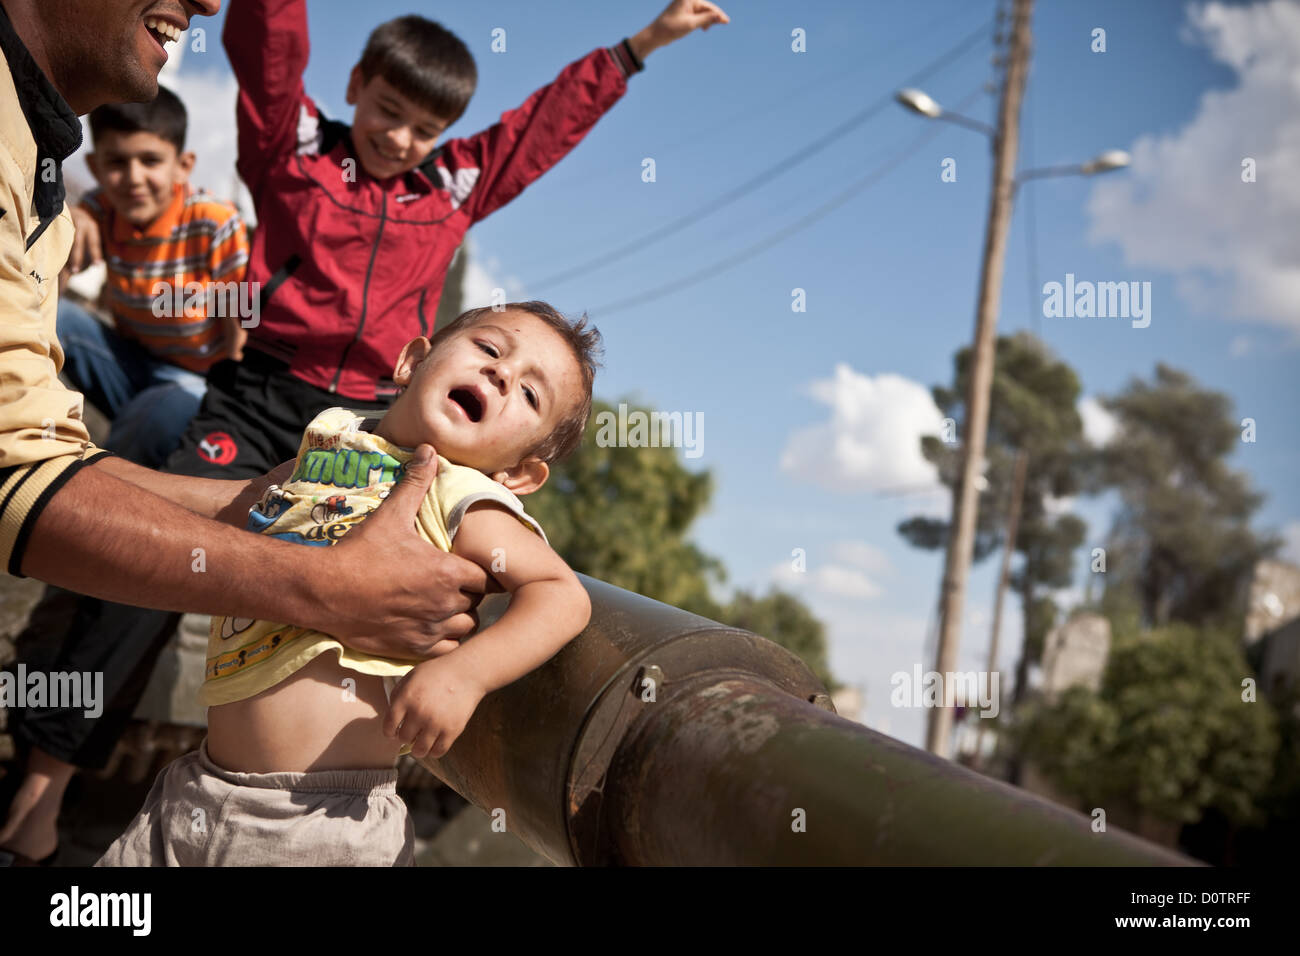 5/10/12, Azaz, Syria. A father holds his child up against the barrel of a disabled tank in the Syrian town of Azaz. Stock Photo